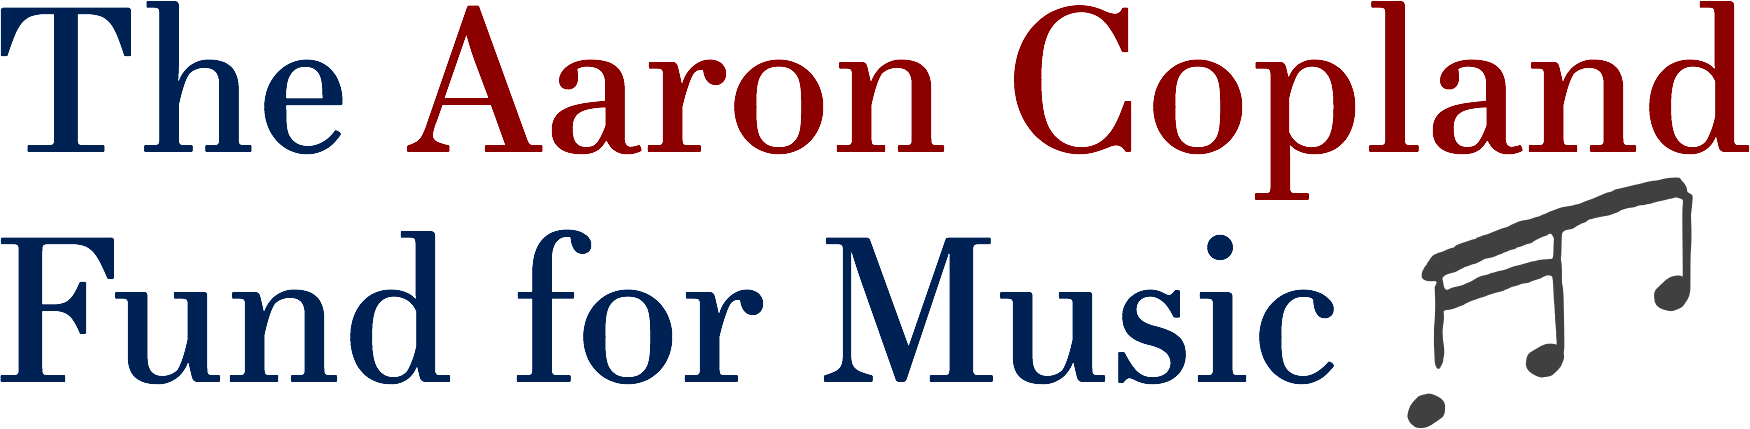 Copland Compact Color - Aaron Copland Fund For Music Clipart (1750x429), Png Download